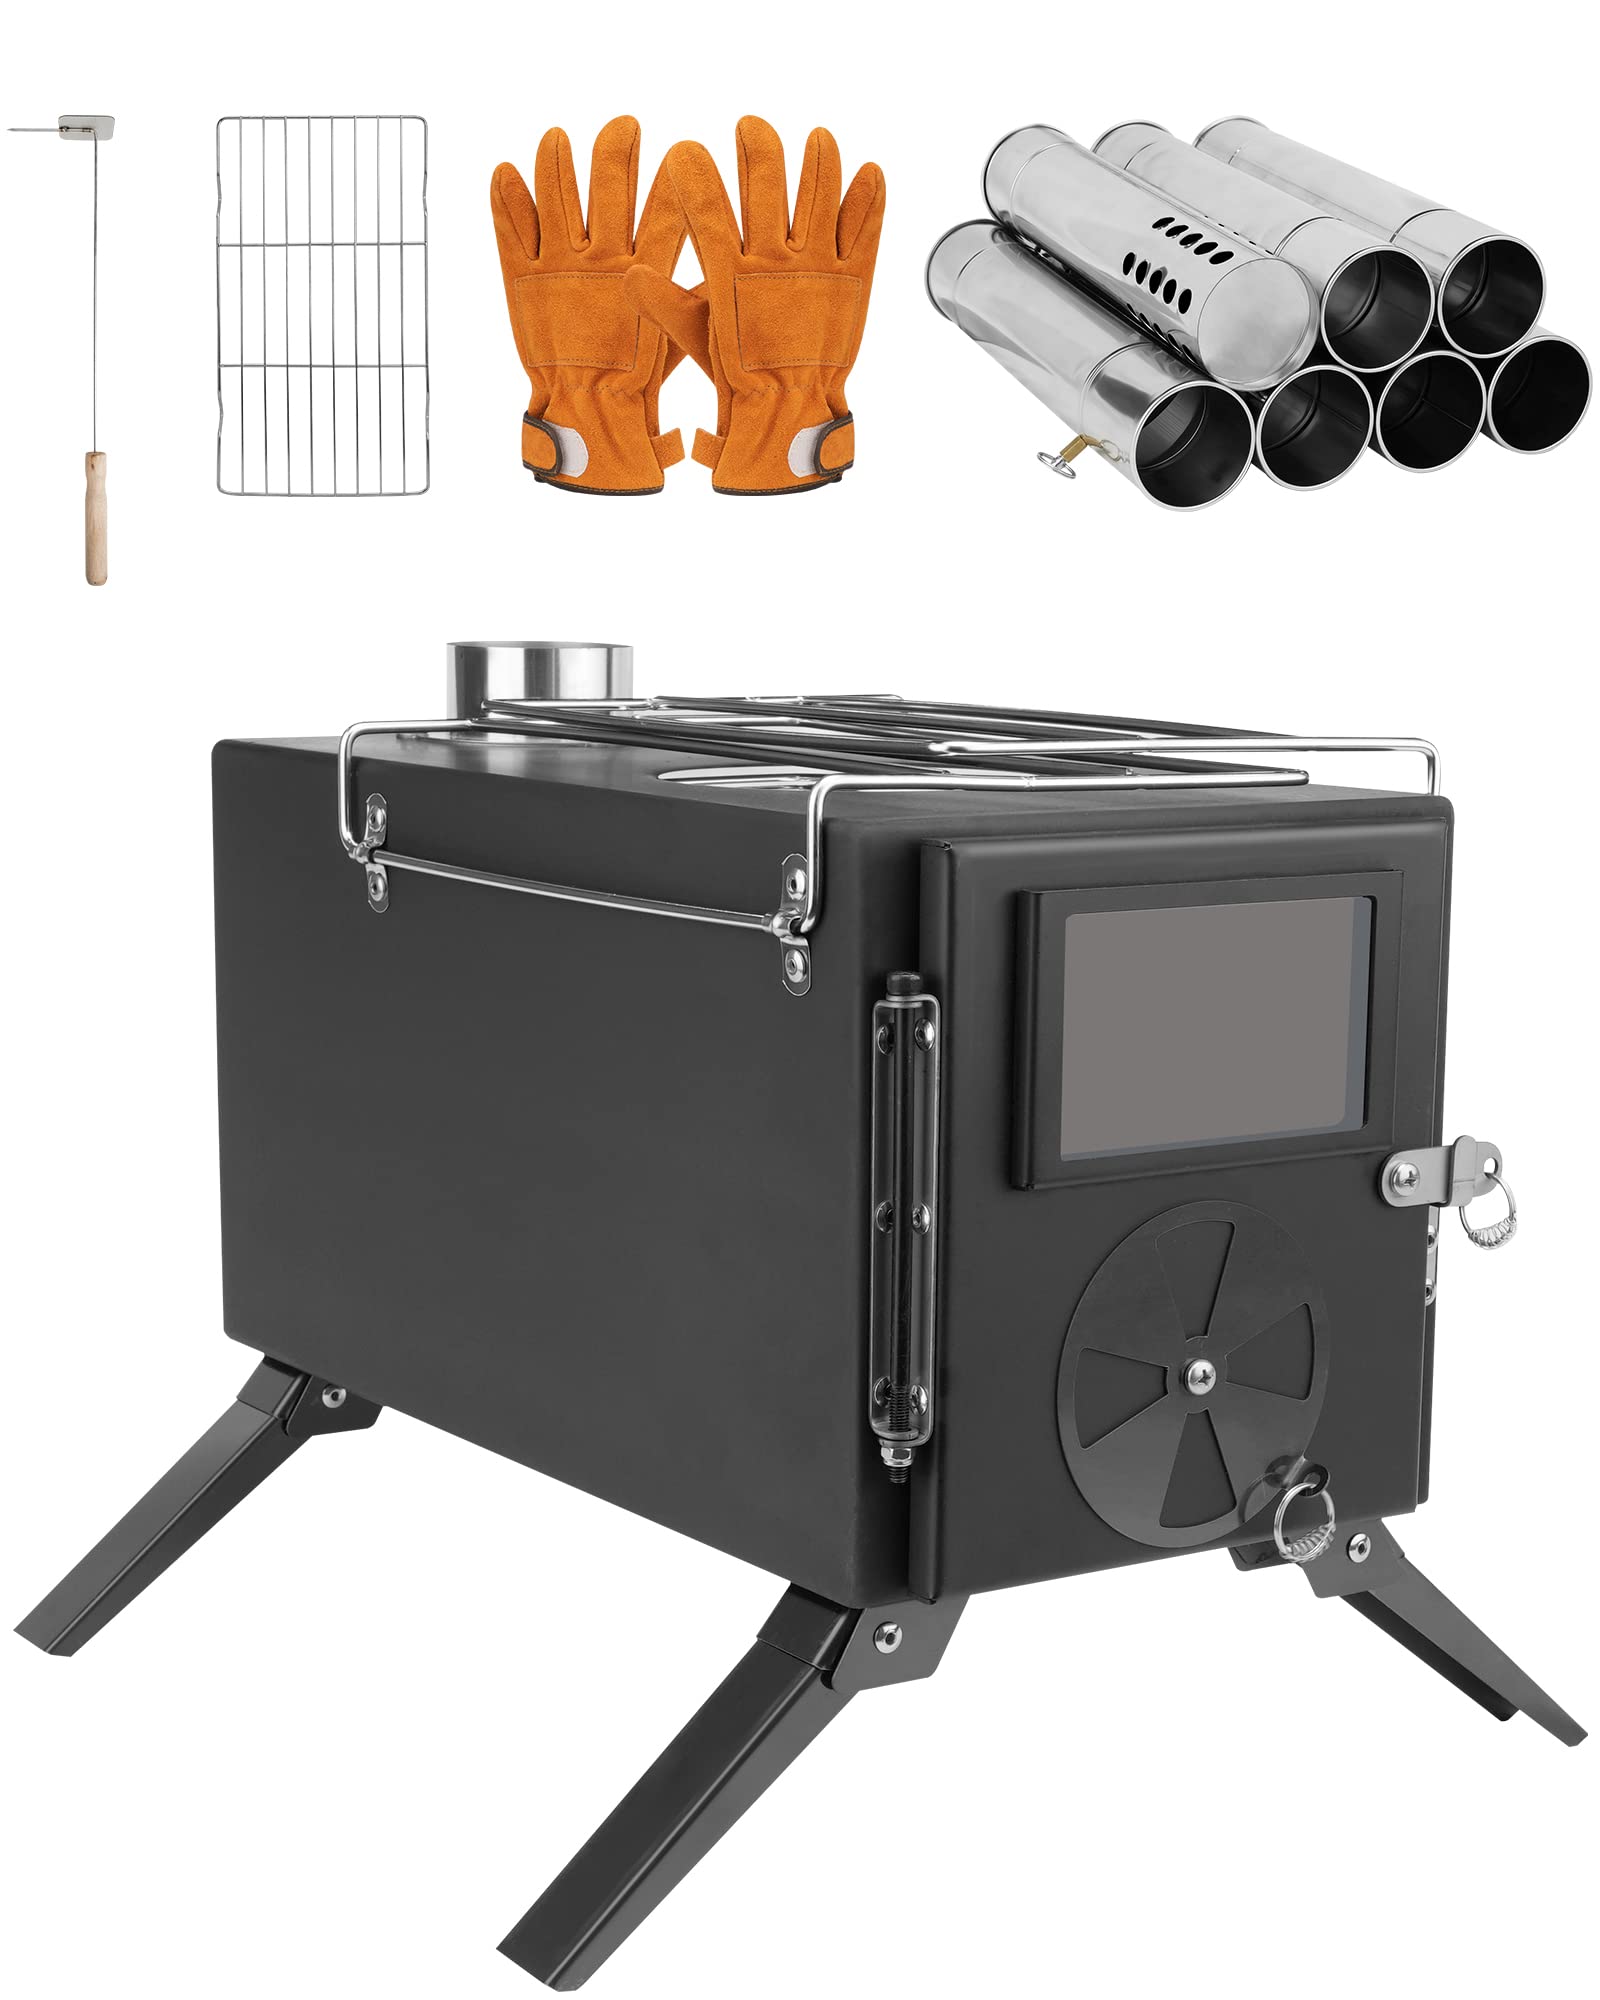 Rikuy Wood Stove for Hot Tents